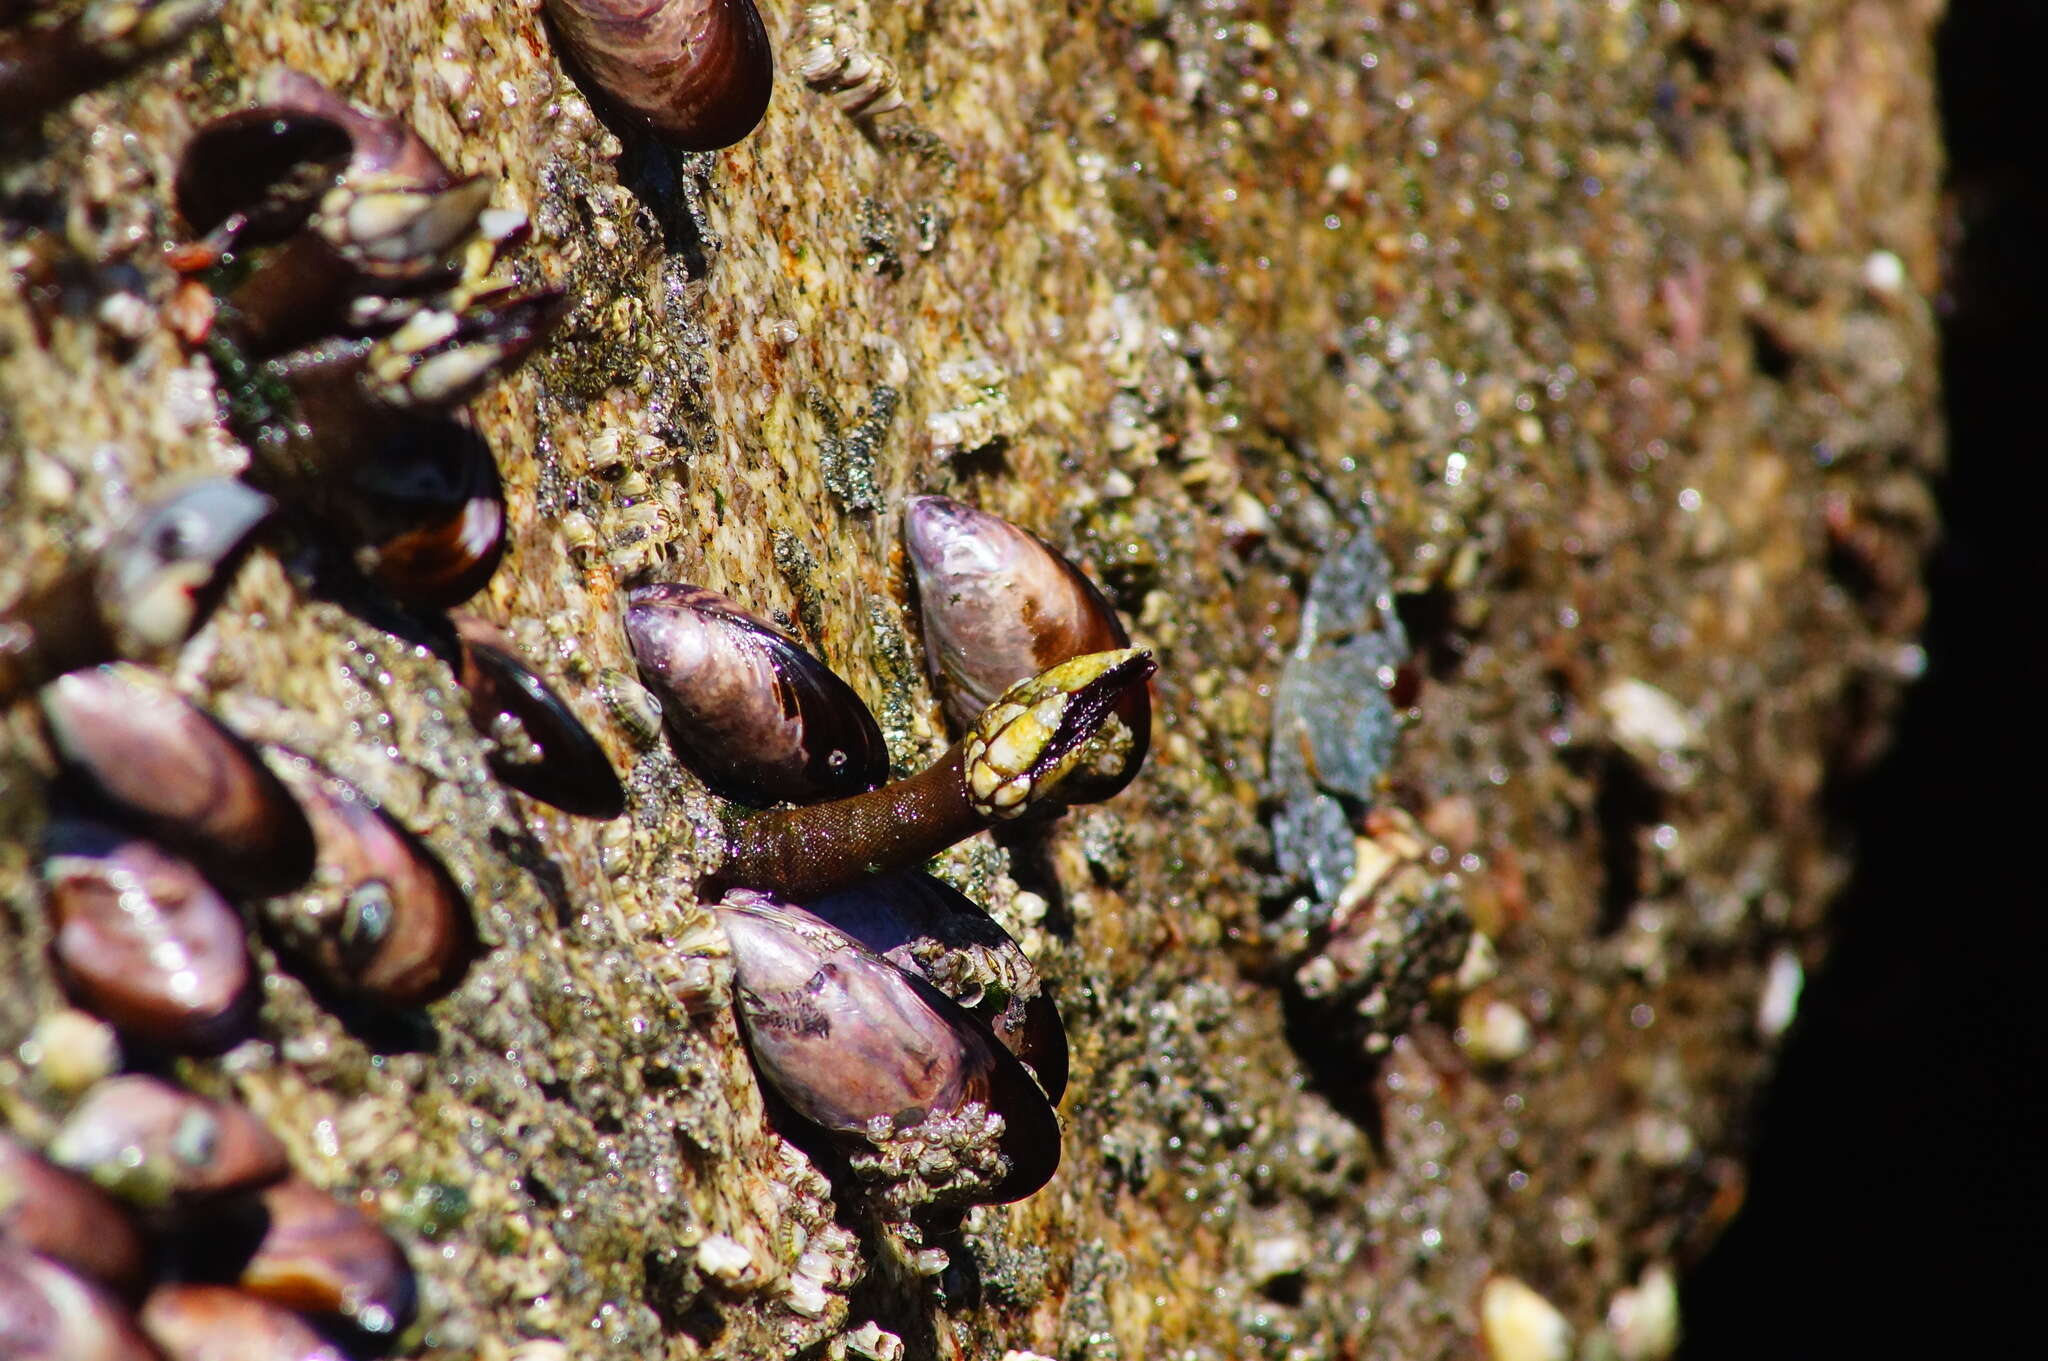 Image of Pacific goose barnacle